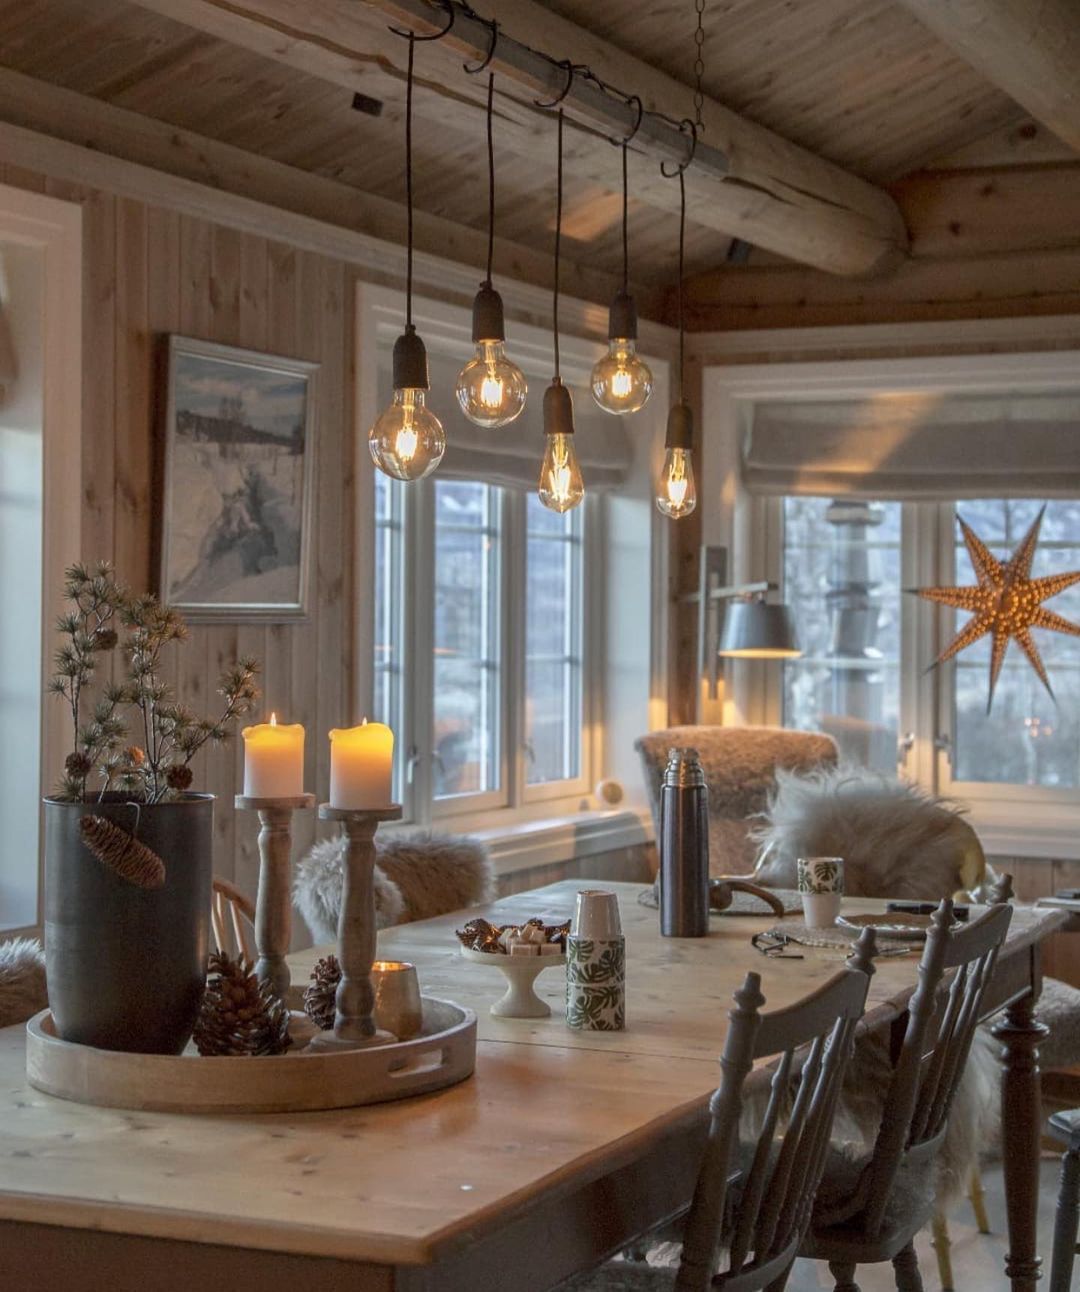 Cozy Winter Dining in a Cabin Setting